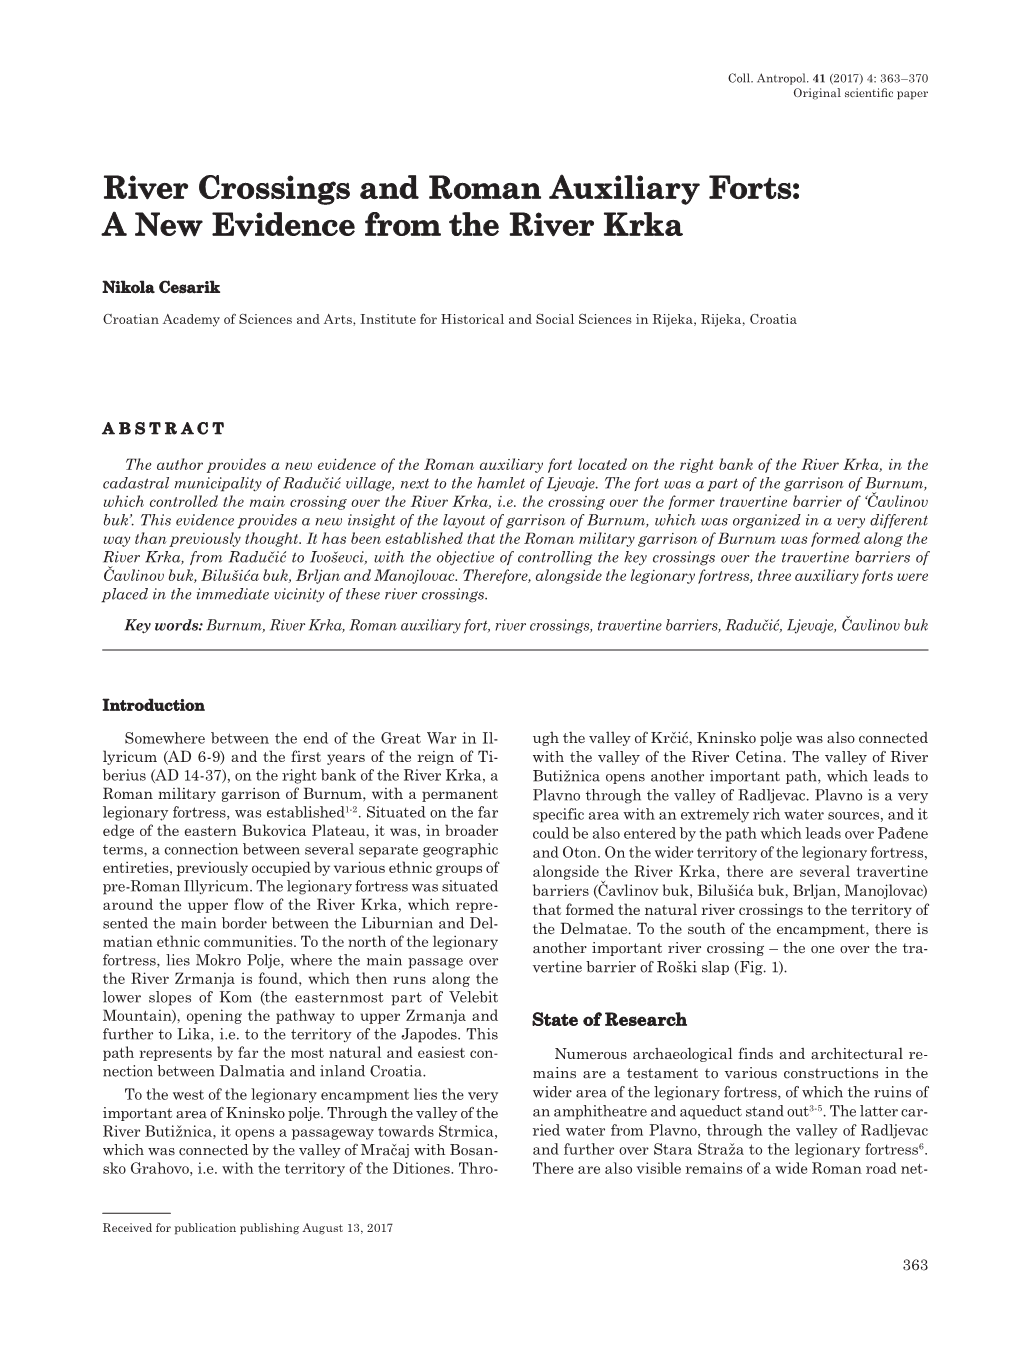 River Crossings and Roman Auxiliary Forts: a New Evidence from the River Krka